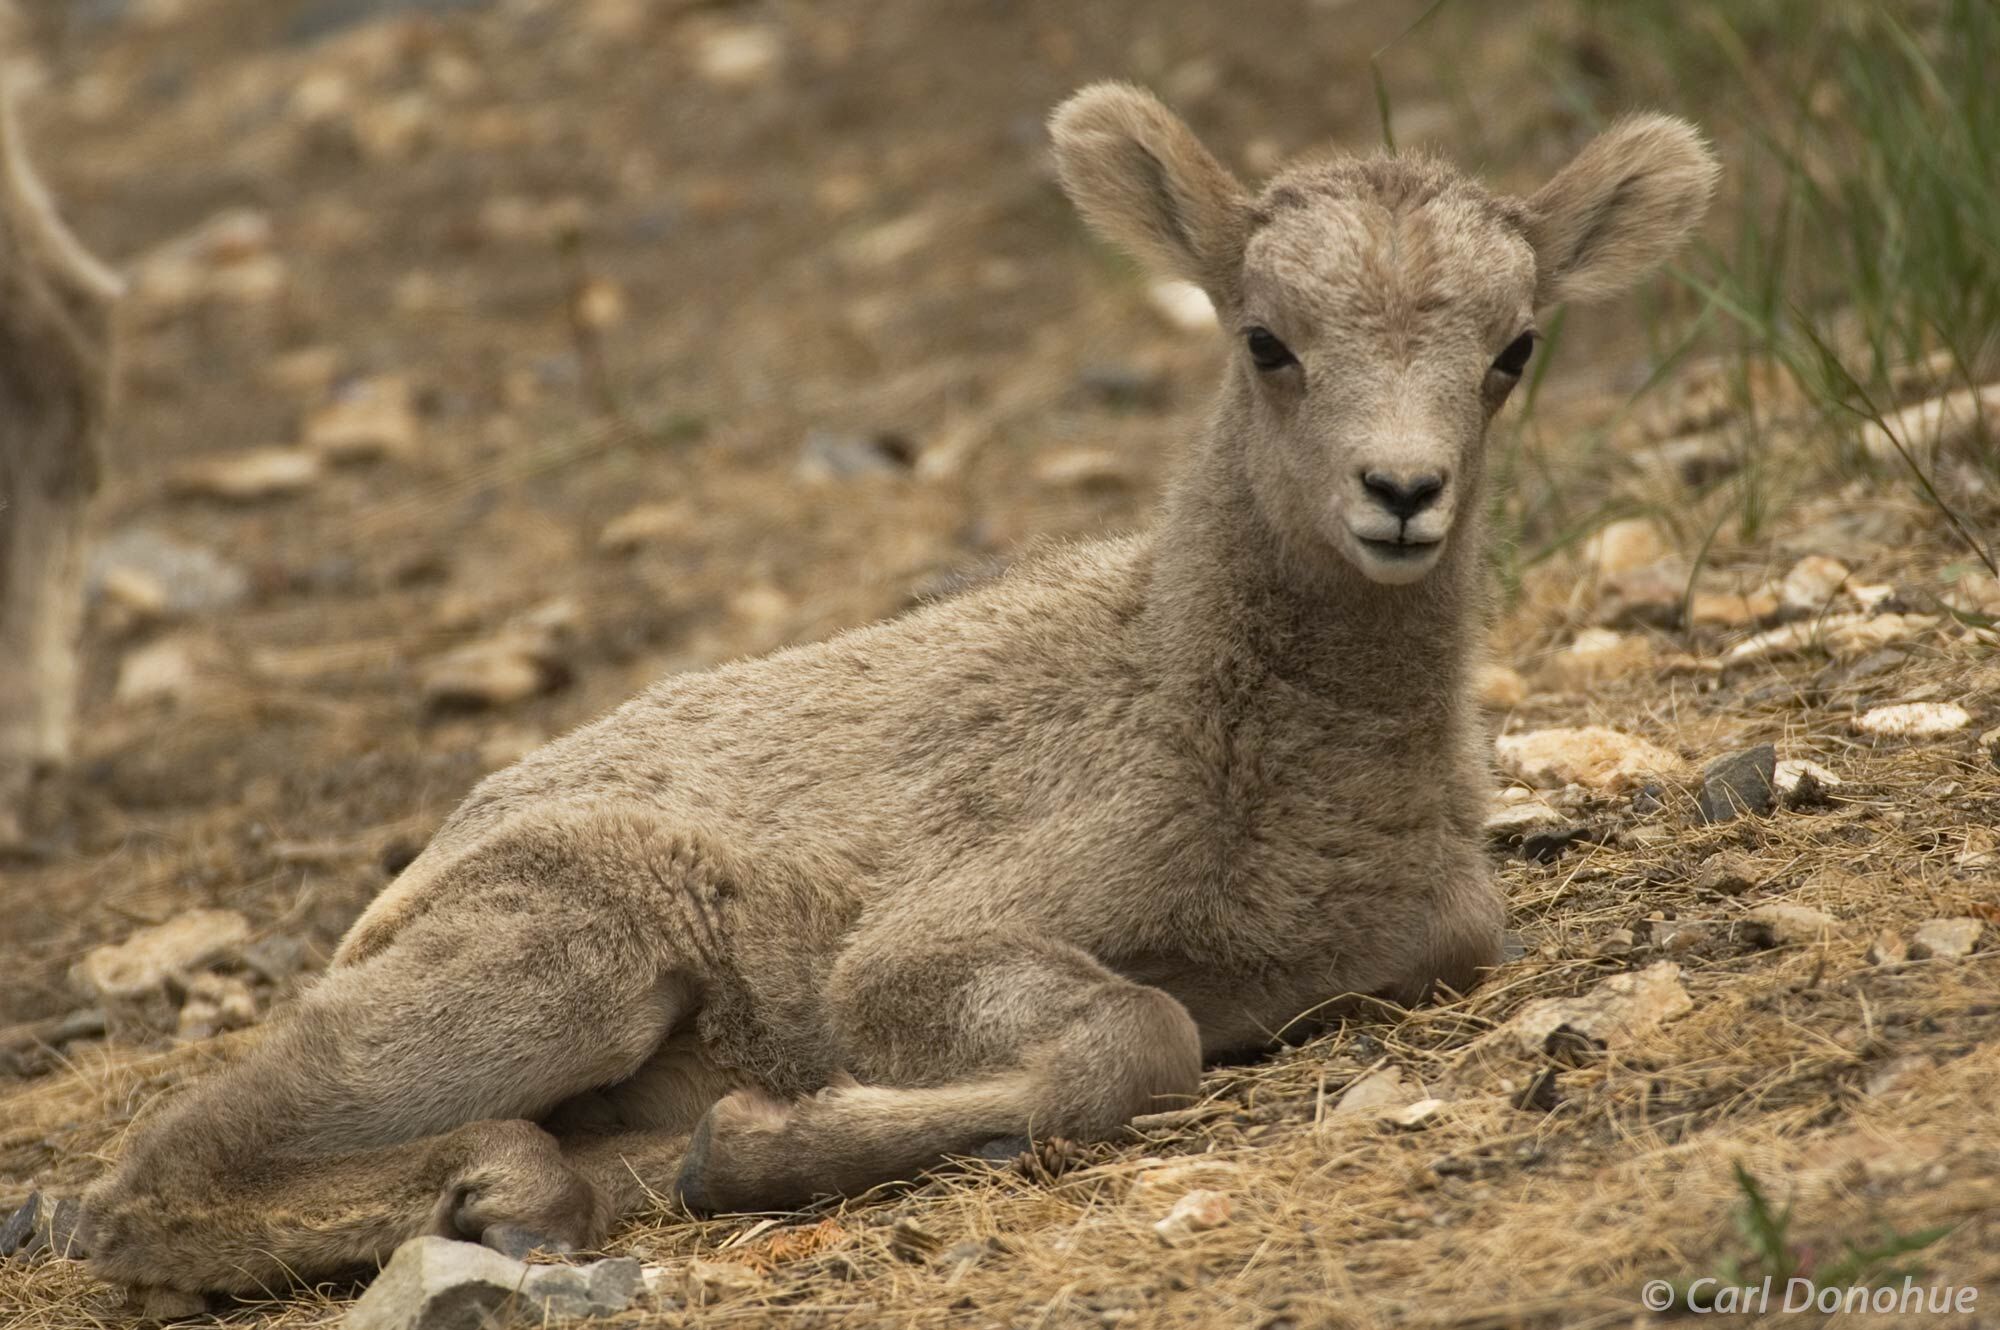 All play and no rest is no fun. A young bighorn Sheep lamb at rest in Canada’s Rocky Mountains, Jasper National Park, Alberta...